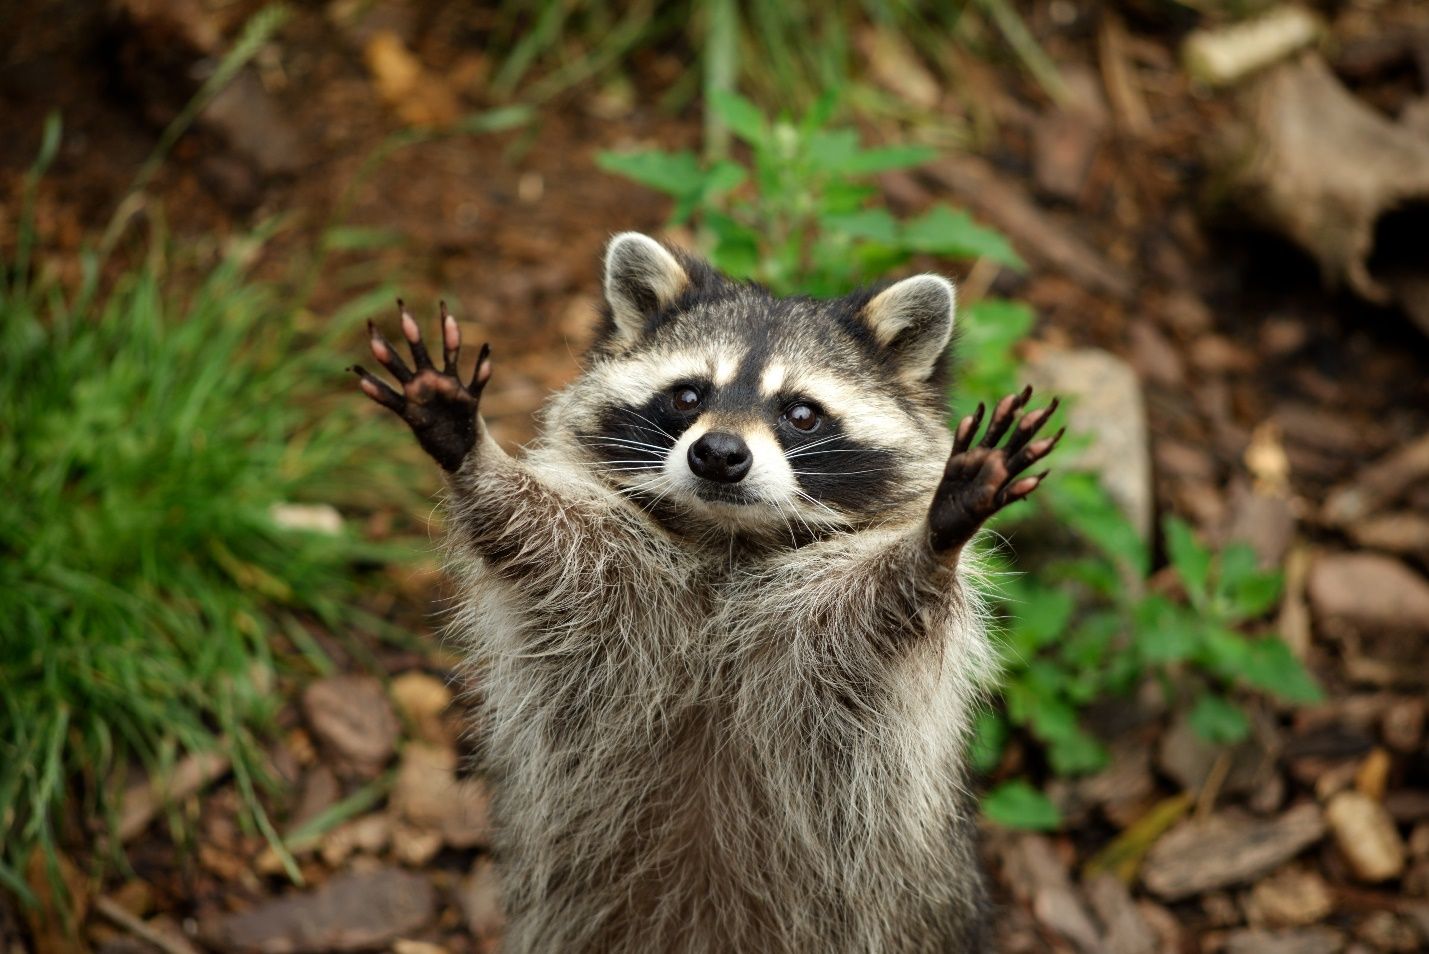 A raccoon is standing on its hind legs with its paws up in the air.